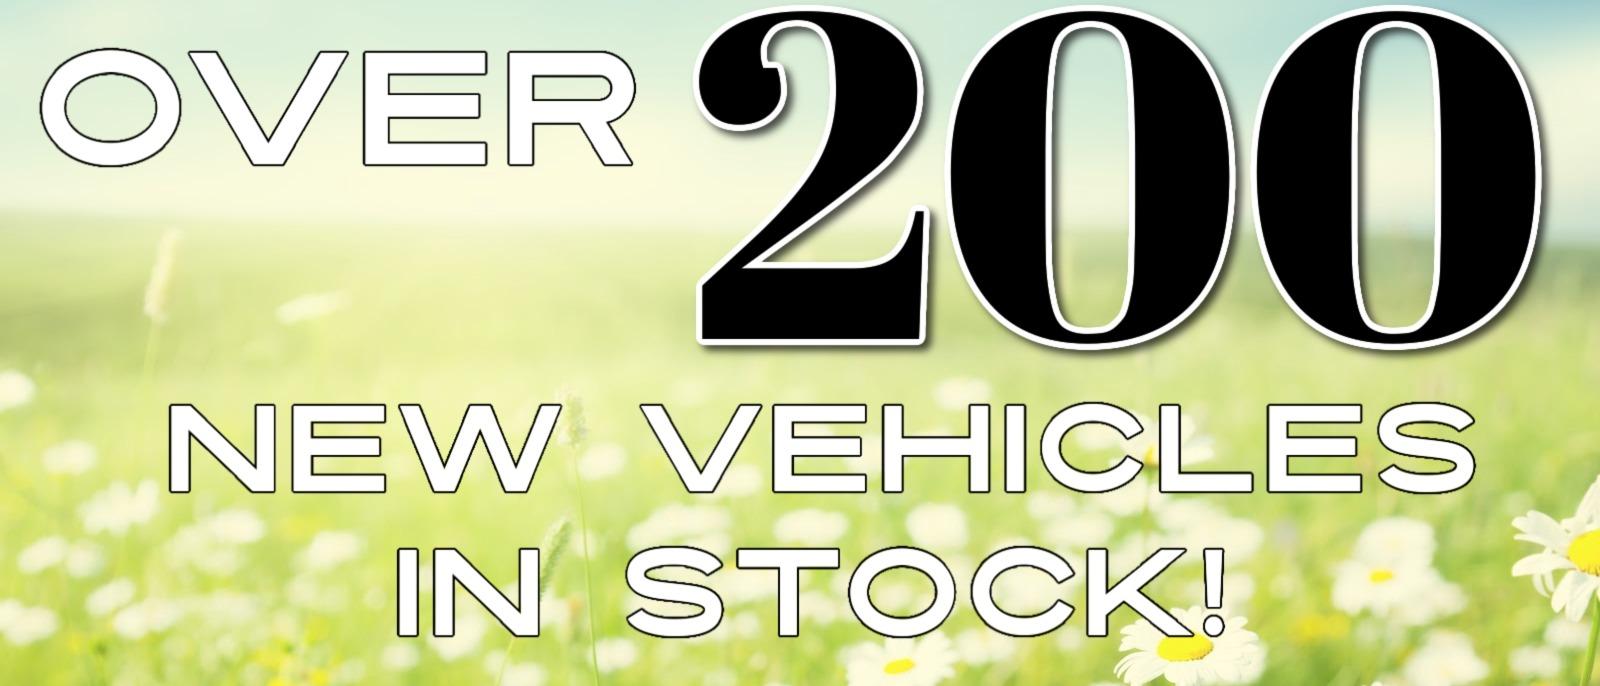 Over 200 new Vehicle in stock